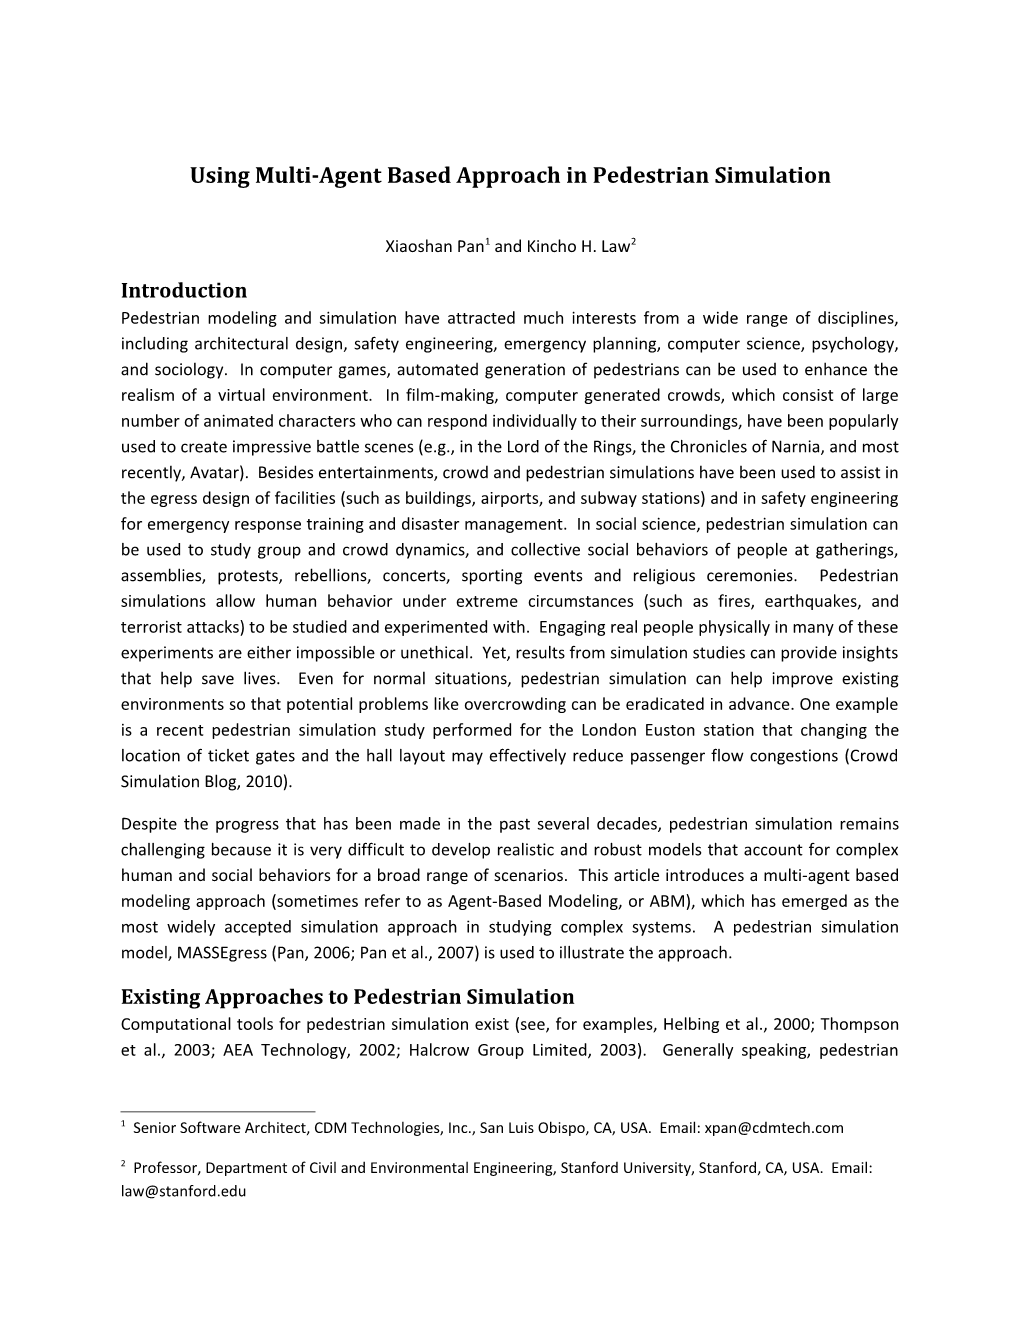 Using Multi-Agent Based Approach in Pedestrian Simulation